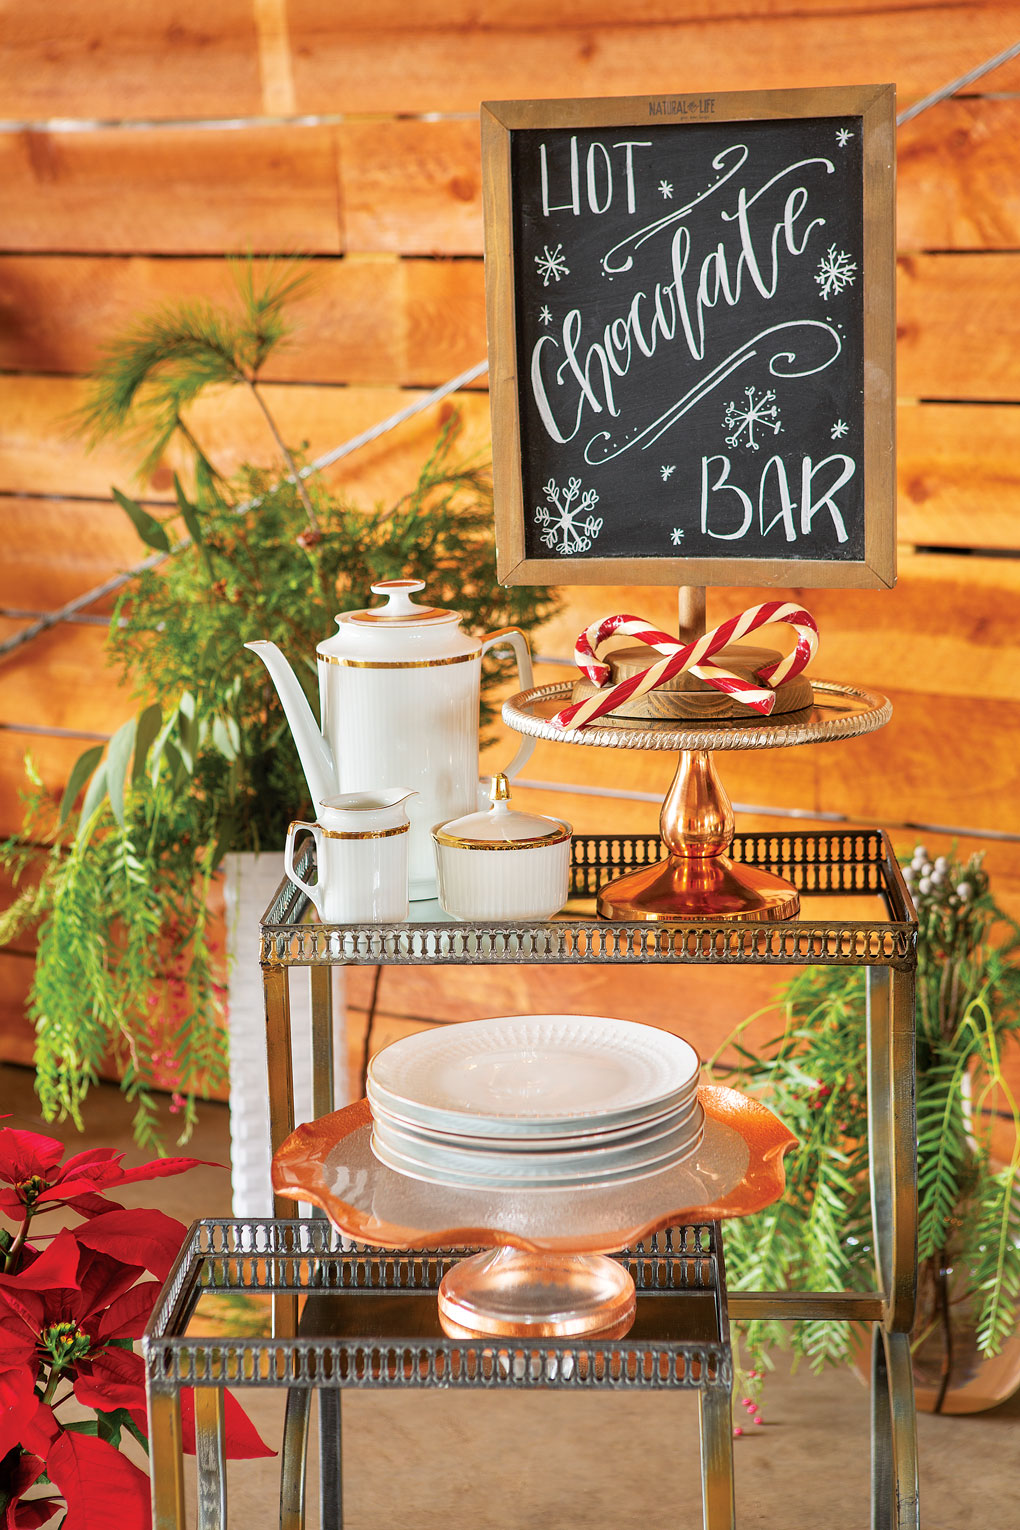 How chocolate bar with chalkboard signs and dishes surrounded by greenery and poinsettias. 